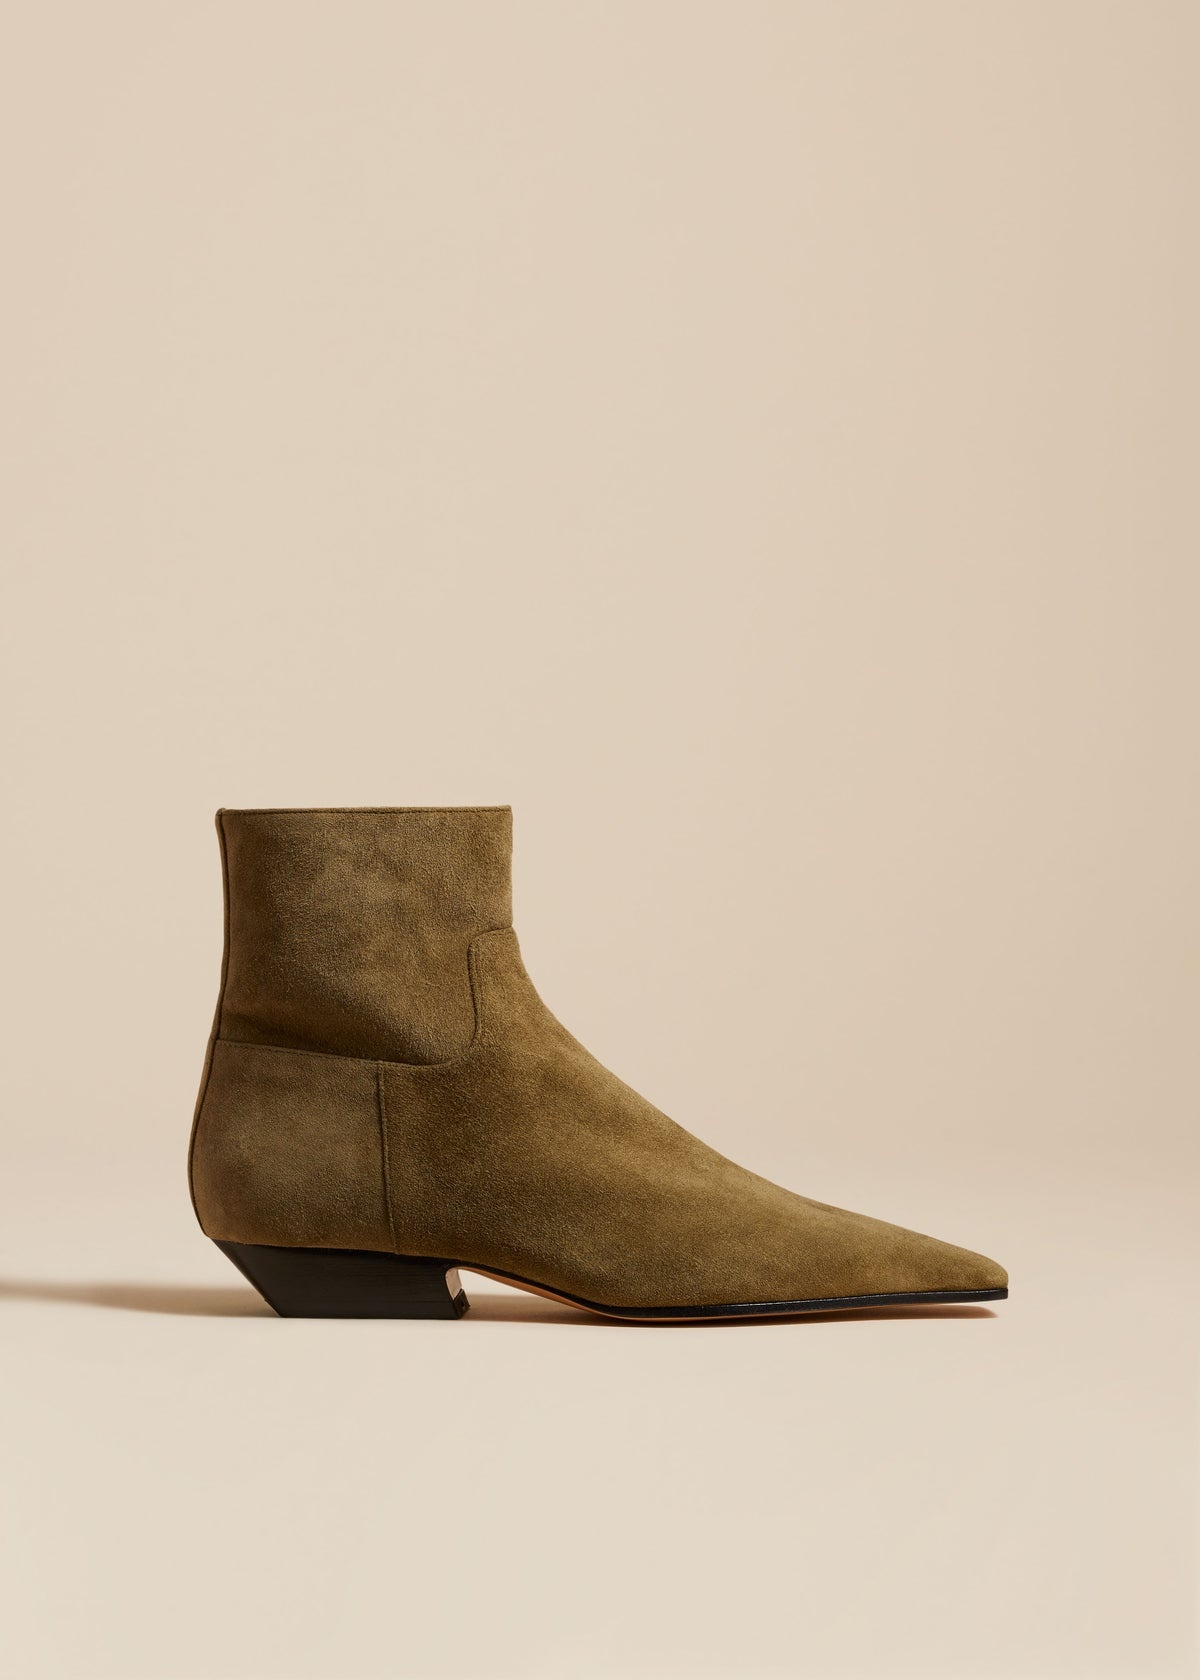 The Marfa Ankle Boot in Khaki Suede - 1